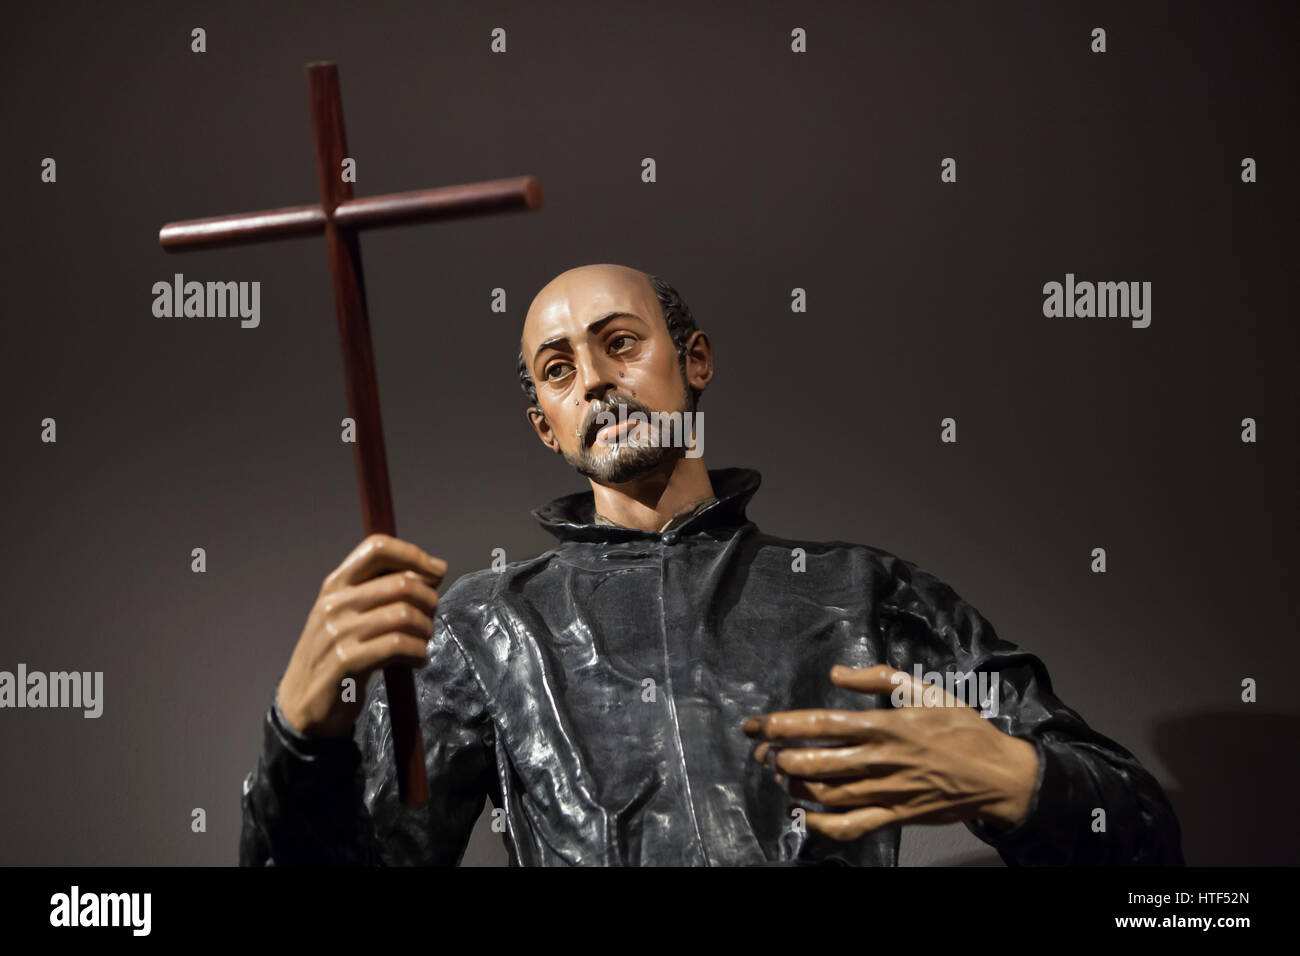 Saint Ignatius of Loyola. Polychrome wooden statue by Spanish Baroque sculptor Juan Martinez Montanes (1610) on display at the exhibition in the Kunsthalle Munchen in Munich, Bavaria, Germany. The exhibition devoted to the Spanish Golden Age runs till 26 March 2017. Stock Photo